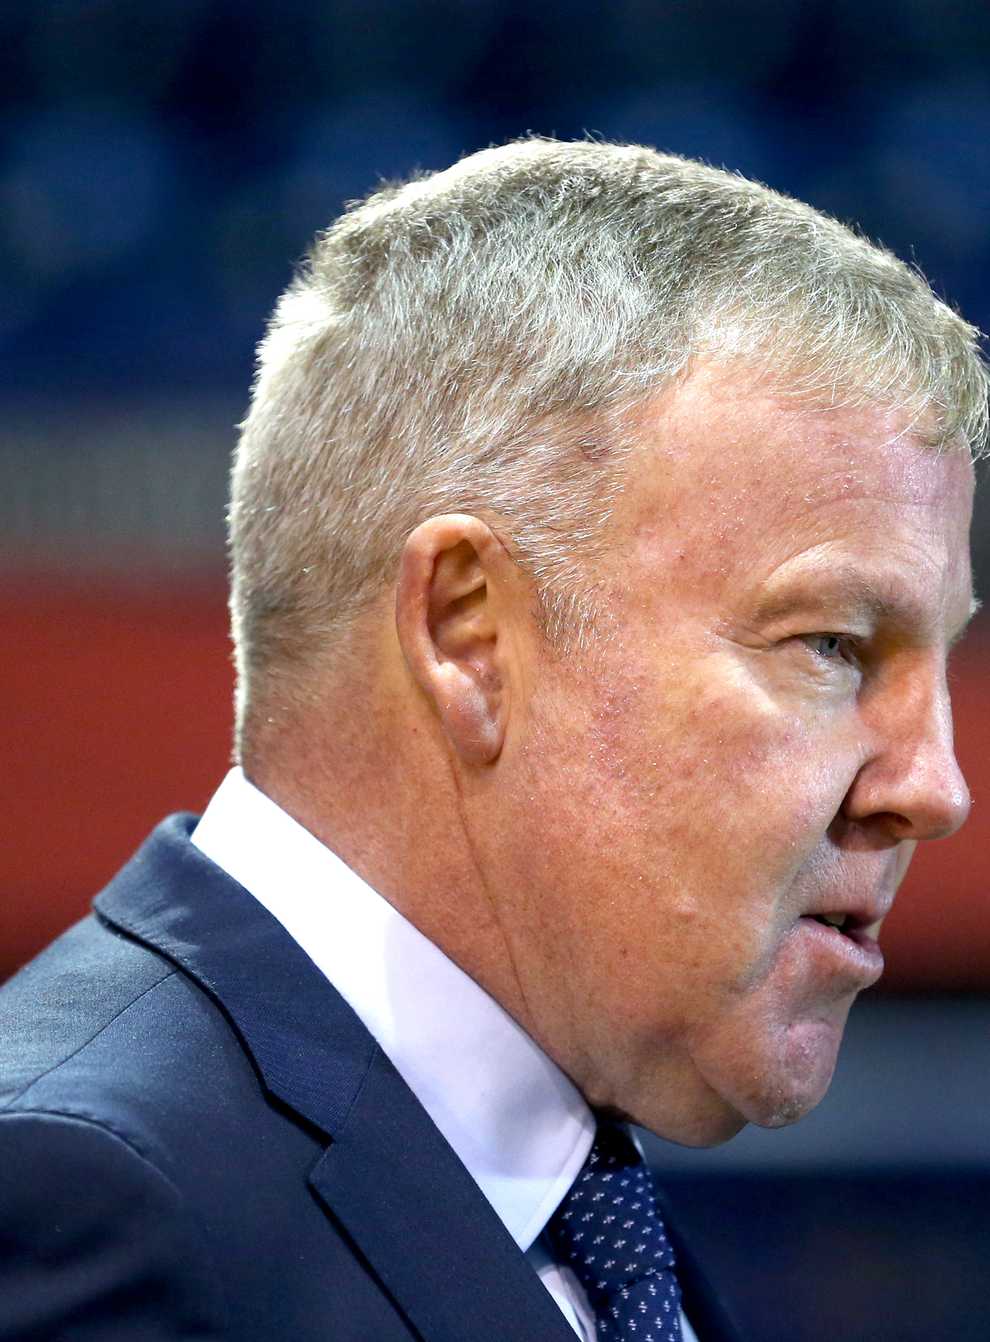 Leyton Orient boss Kenny Jackett was left to reflect on two dropped points after the draw at Scunthorpe (Steven Paston/PA)